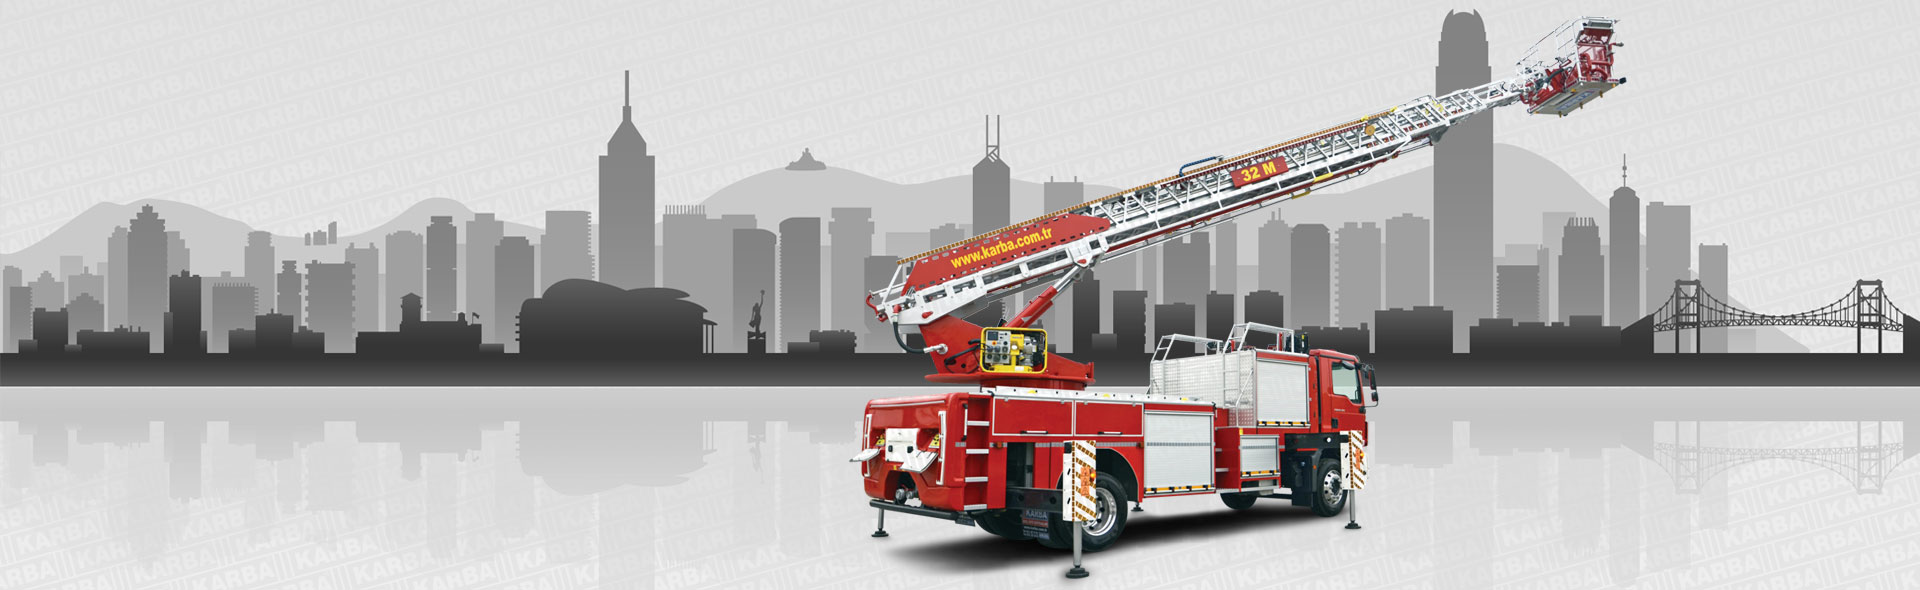 Aerial Ladder Firefighting Vehicles